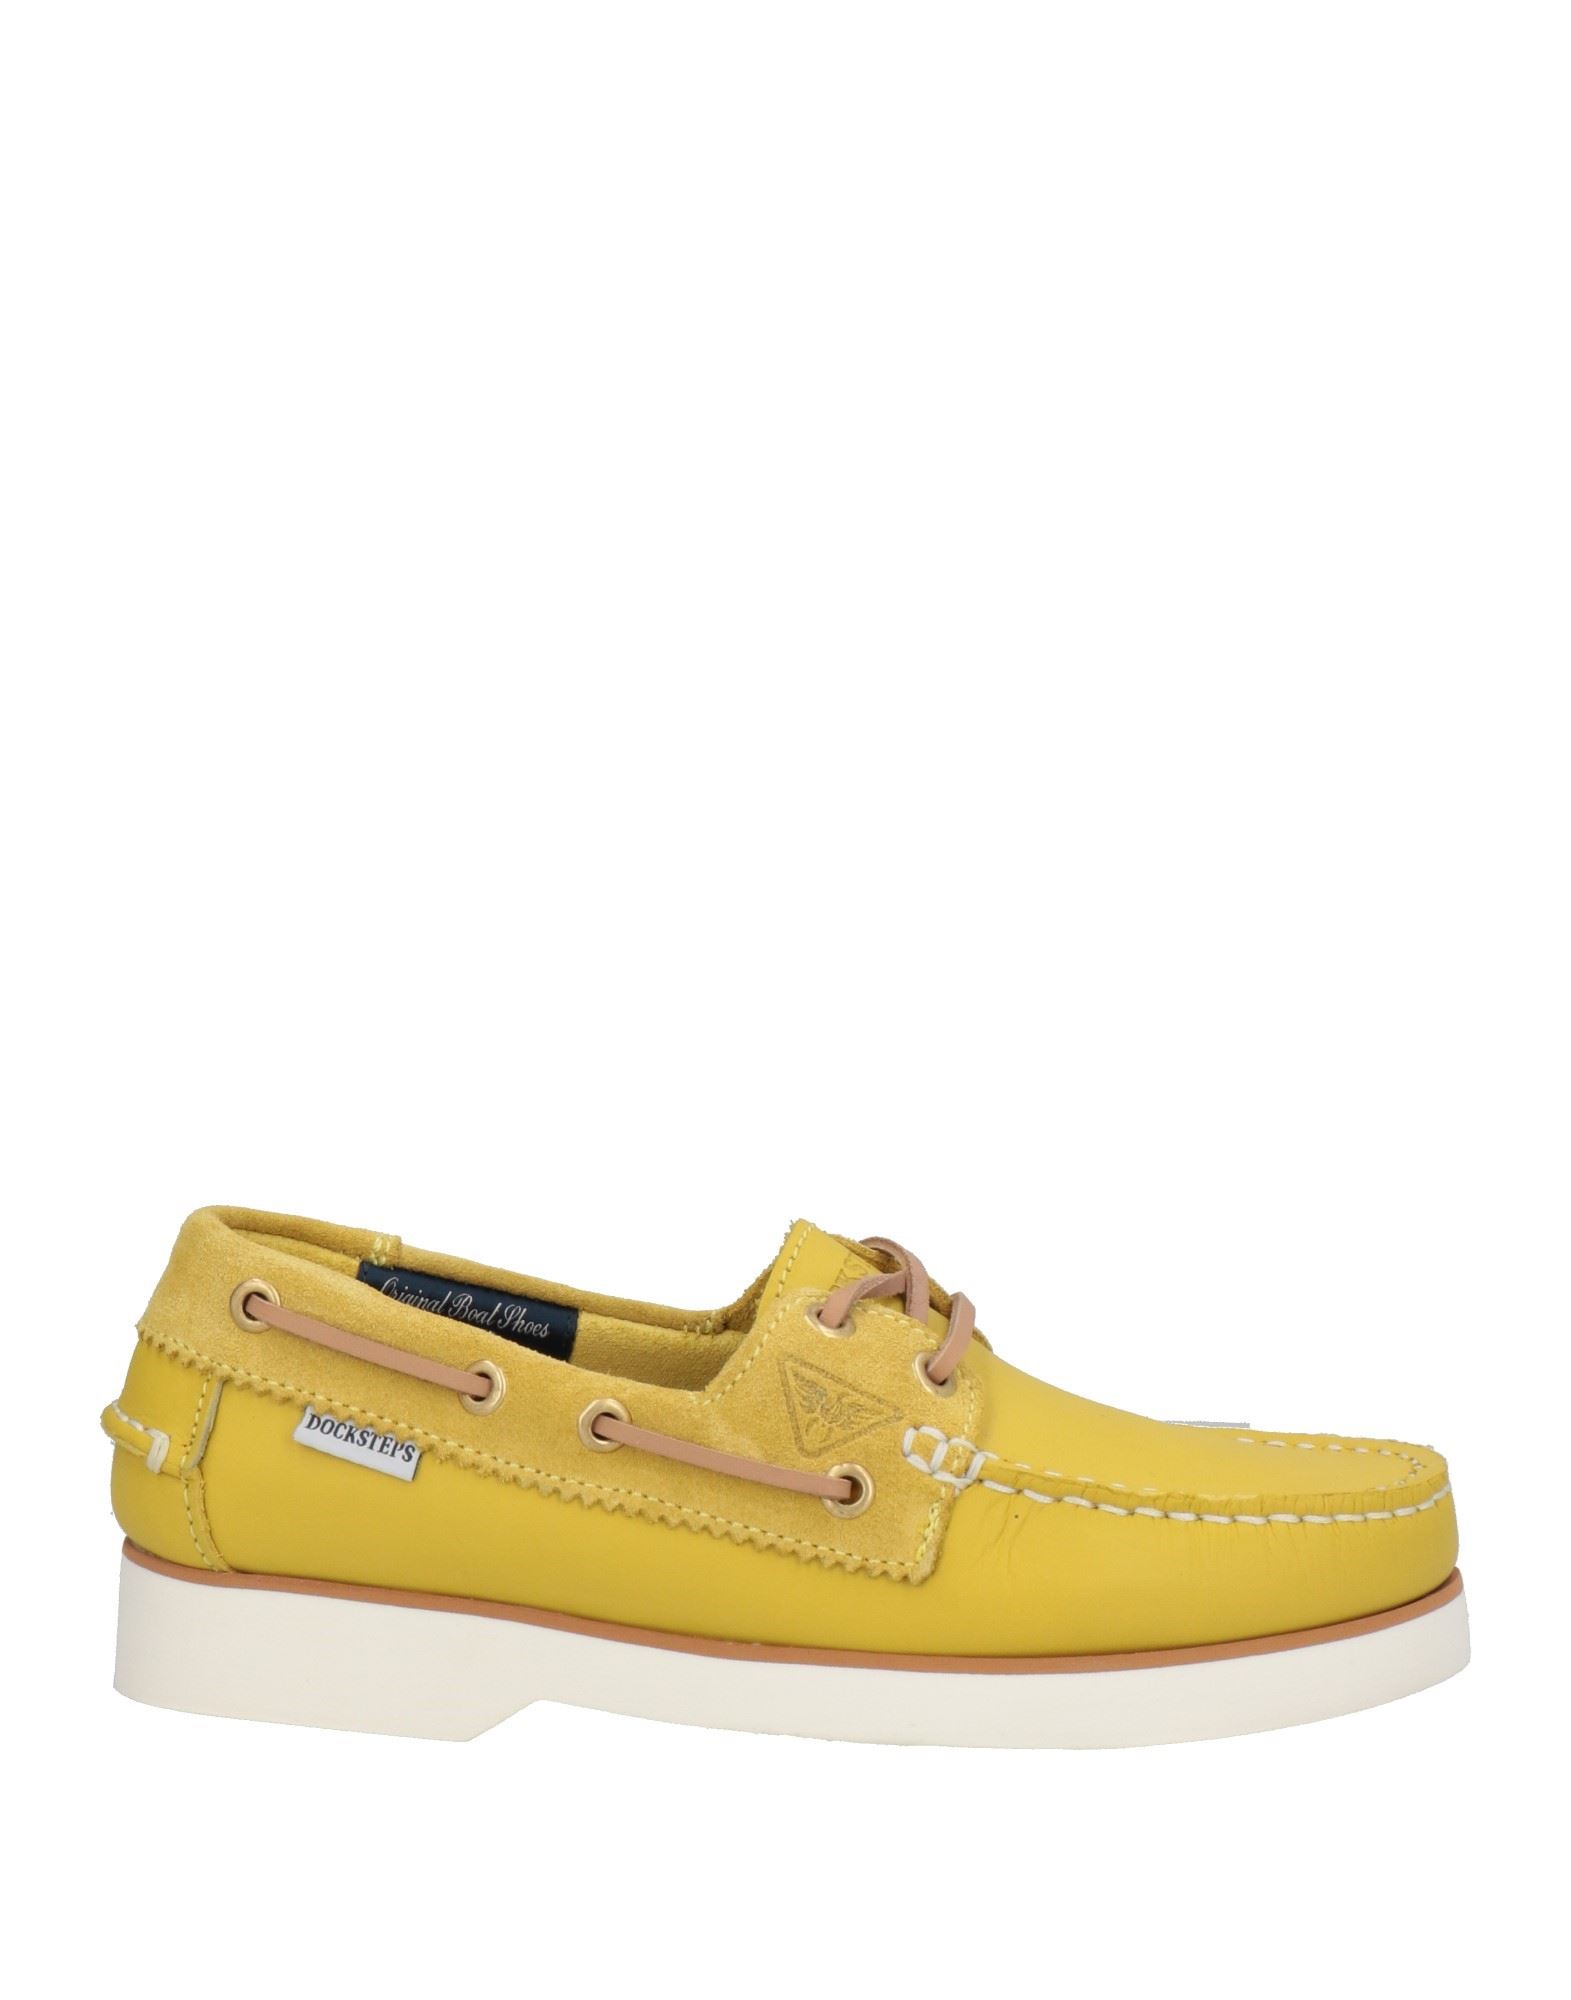 Docksteps Loafers In Yellow